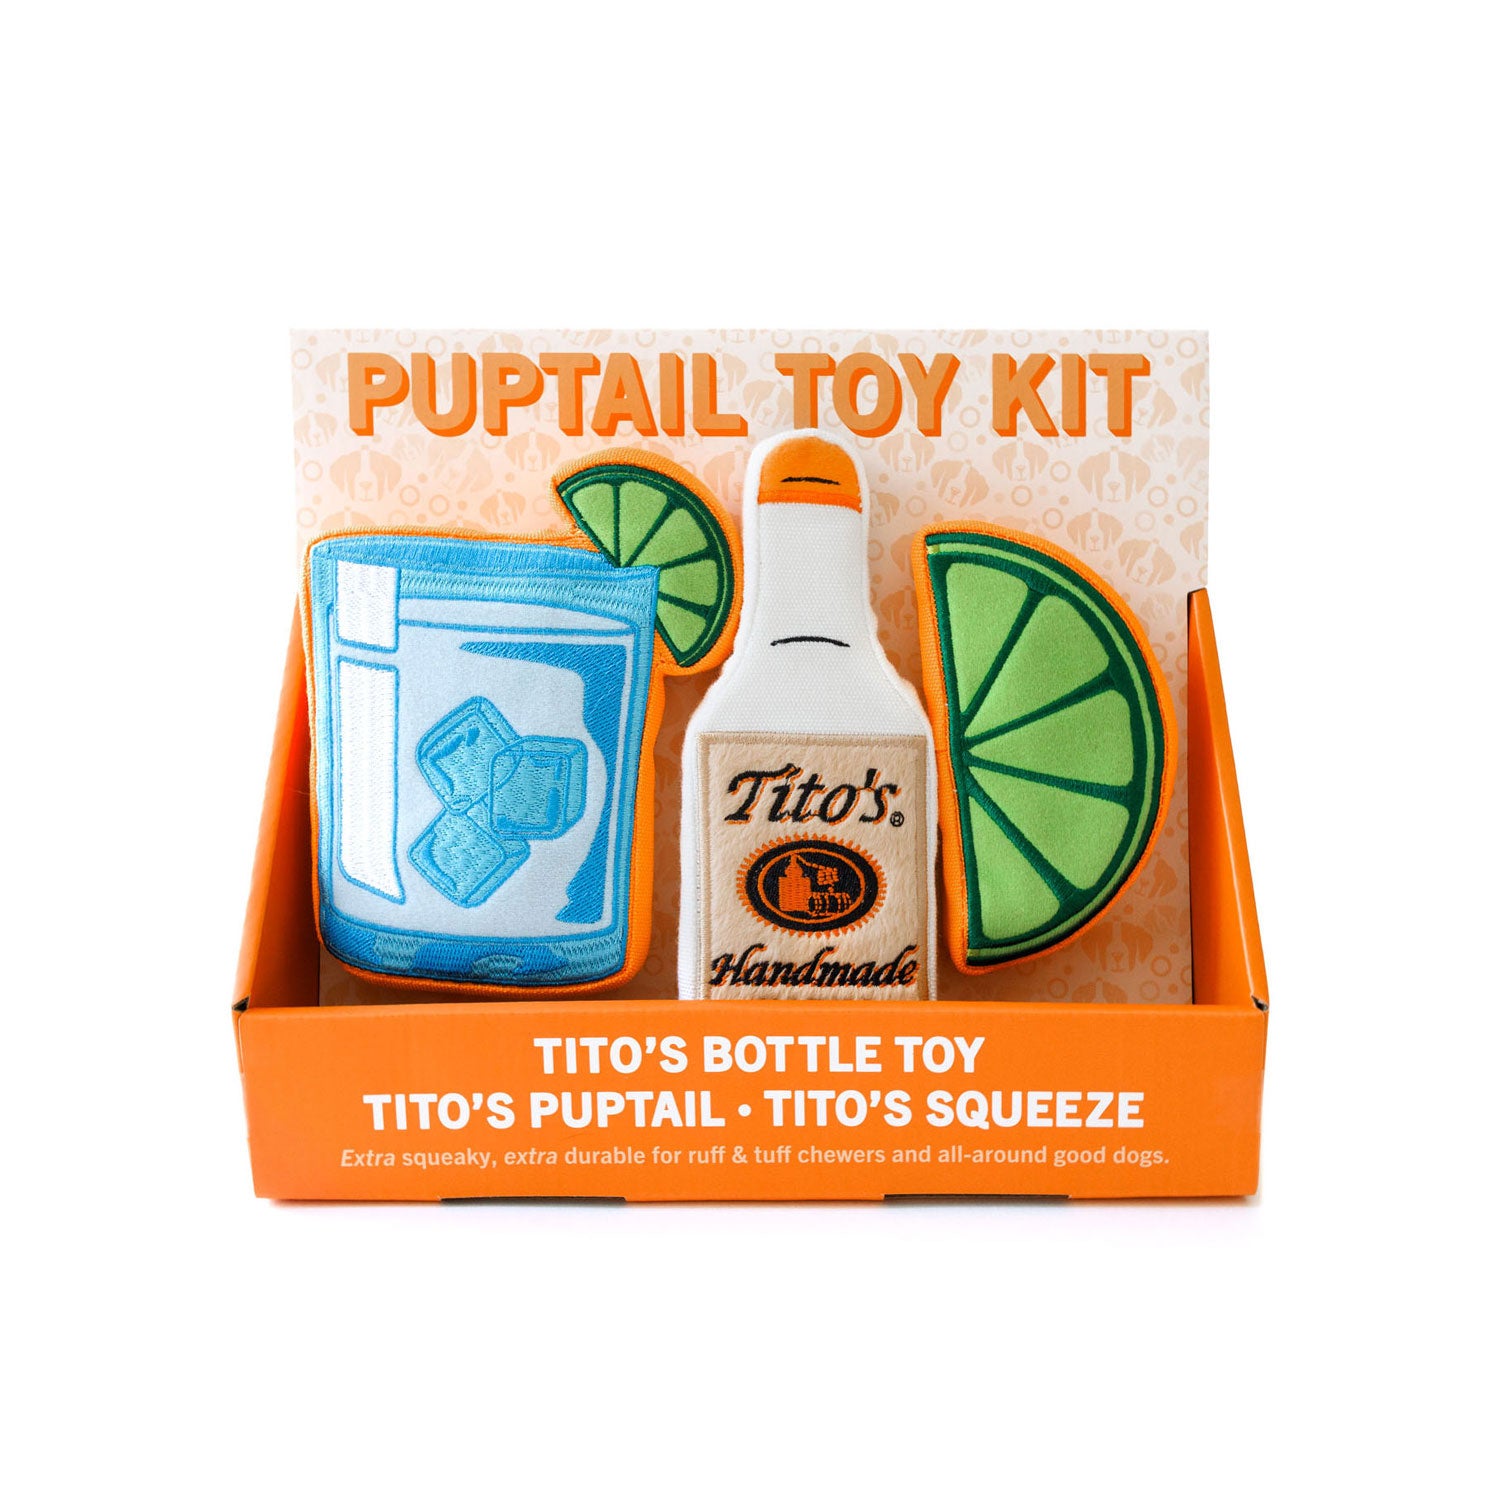 Tito's Puptail Toy Kit with Tito's Bottle Toy, Tito's Puptail squeeze toy, and Tito's Squeeze lime toy